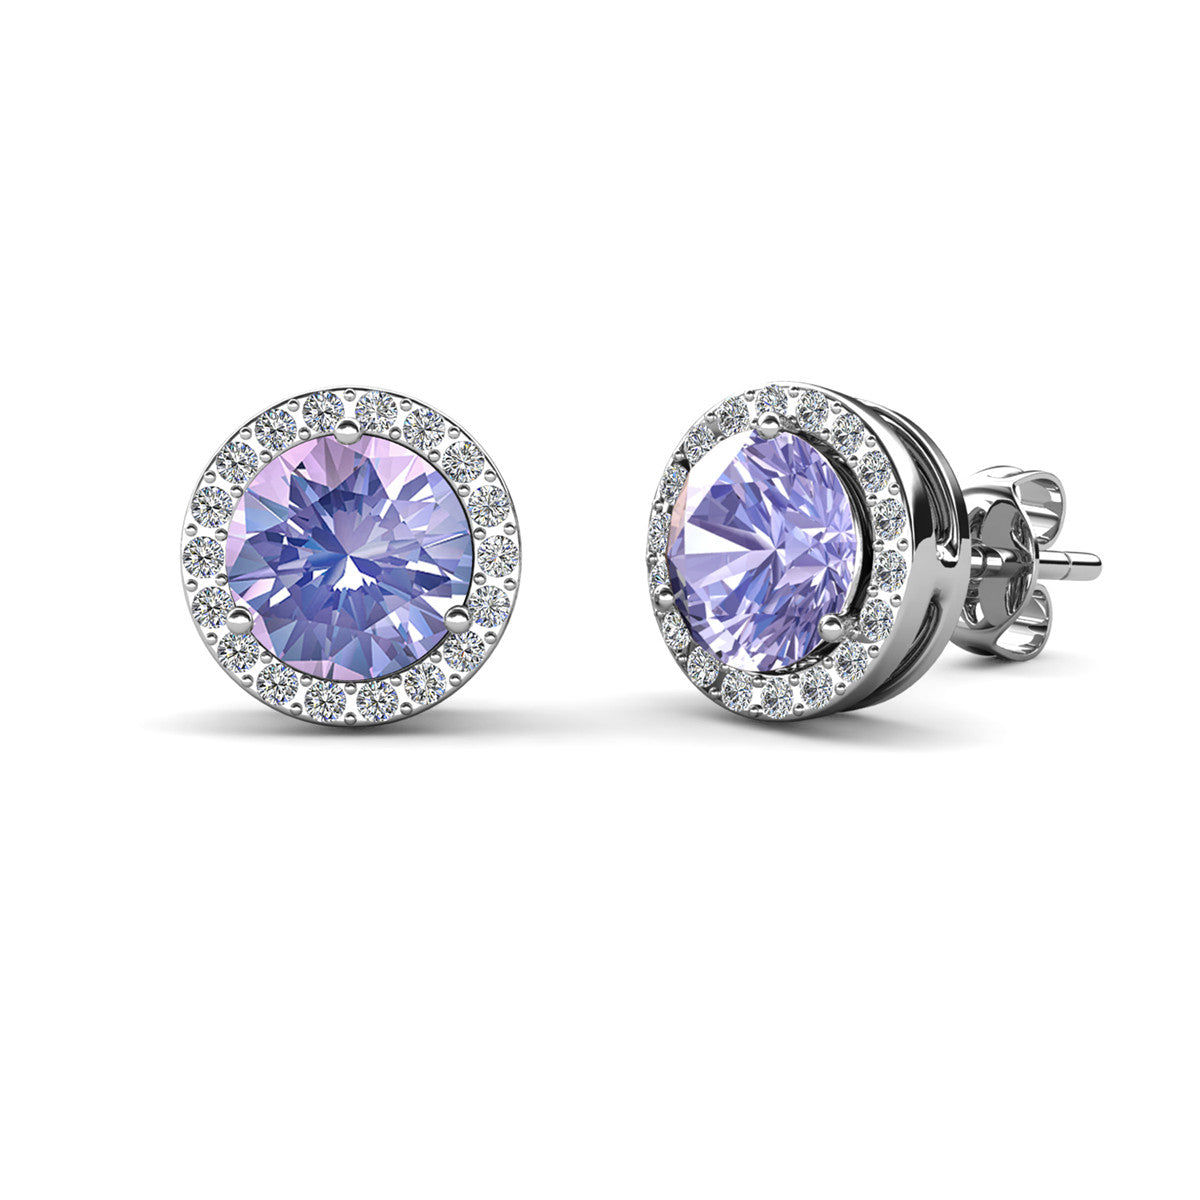 Royal June Birthstone Alexandrite Earrings, 18k White Gold Plated Silver Halo Earrings with Round Cut Crystals